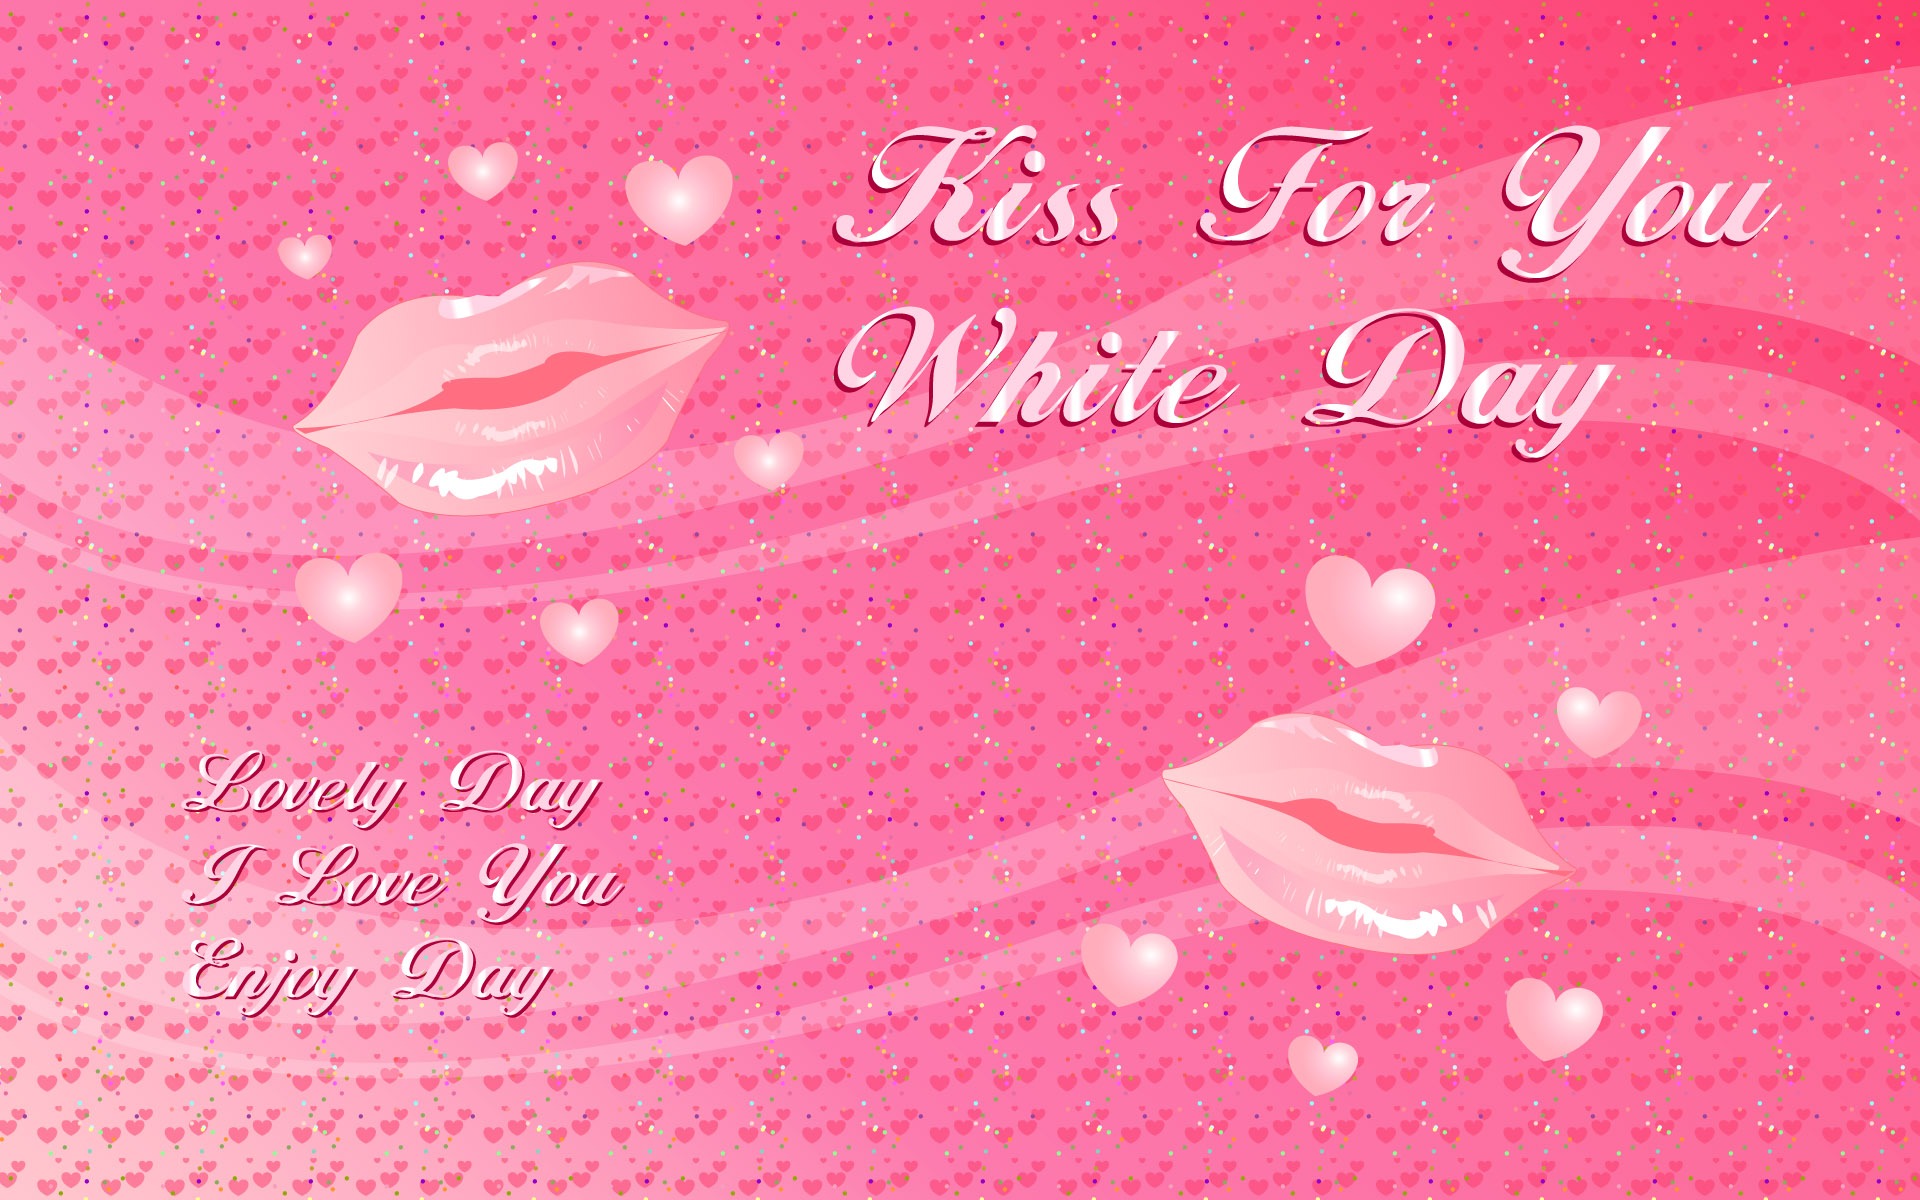 Valentine's Day Theme Wallpapers (1) #5 - 1920x1200